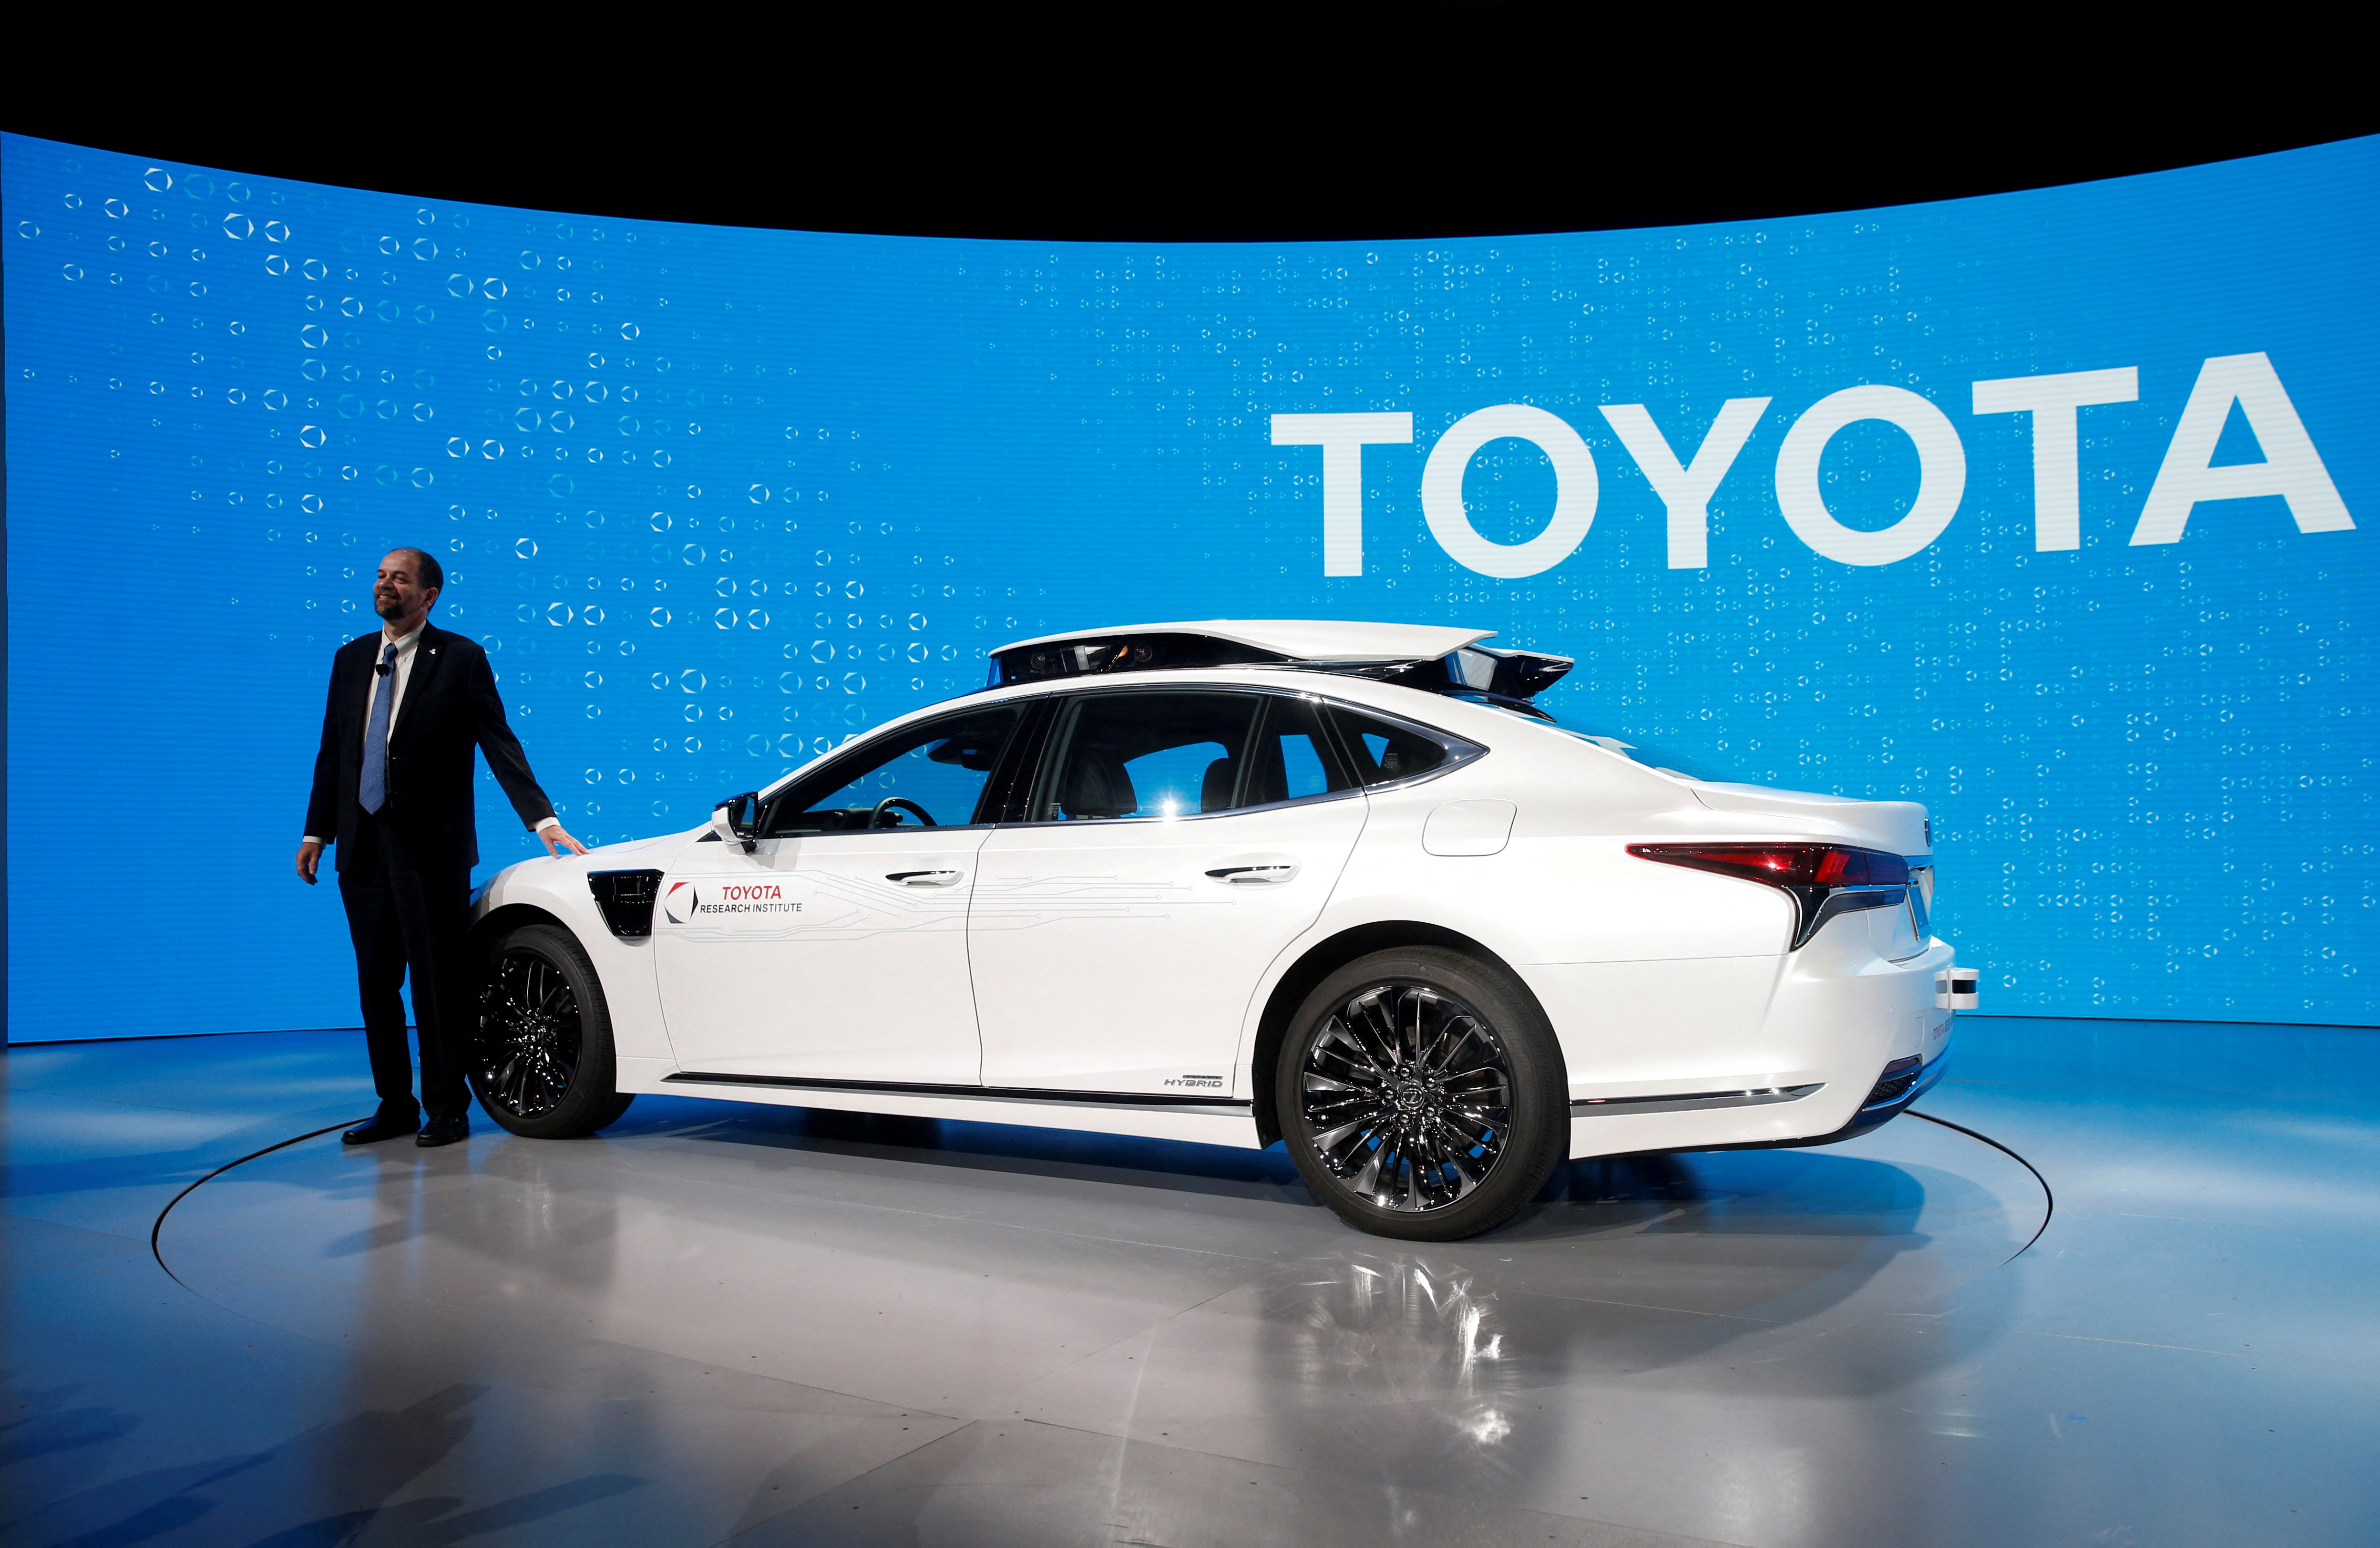 Gill Pratt, CEO of the Toyota Research Institute (TRI), poses by a research vehicle equipped with Toyota Guardian, a accident avoidance system that assists drivers, during a Toyota news conference at the 2019 CES in Las Vegas,